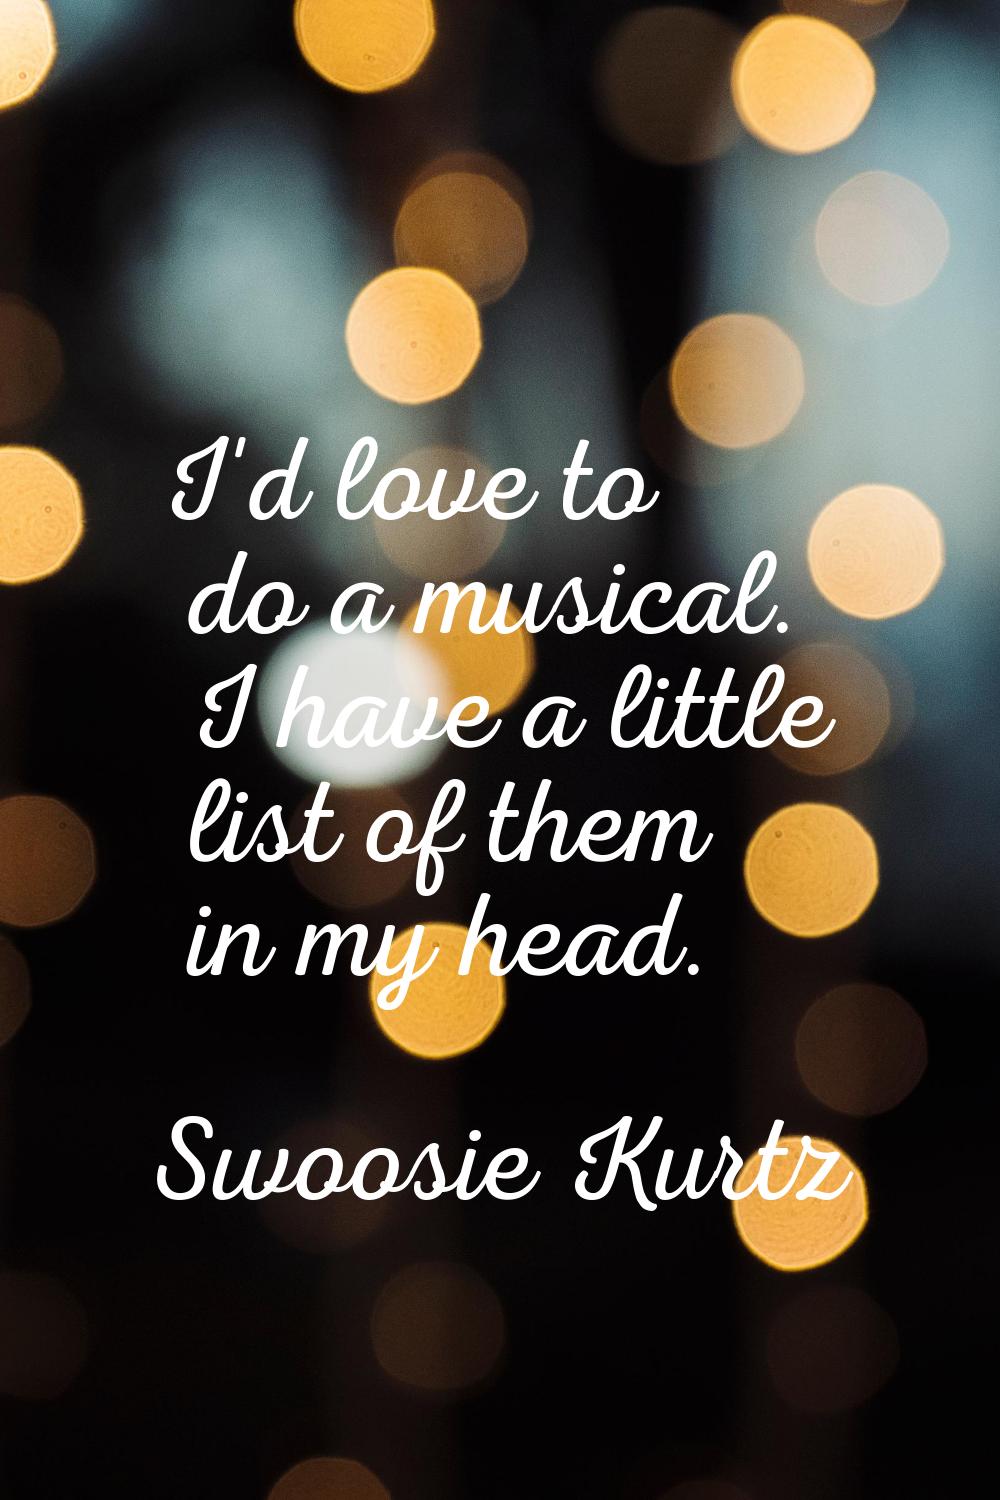 I'd love to do a musical. I have a little list of them in my head.